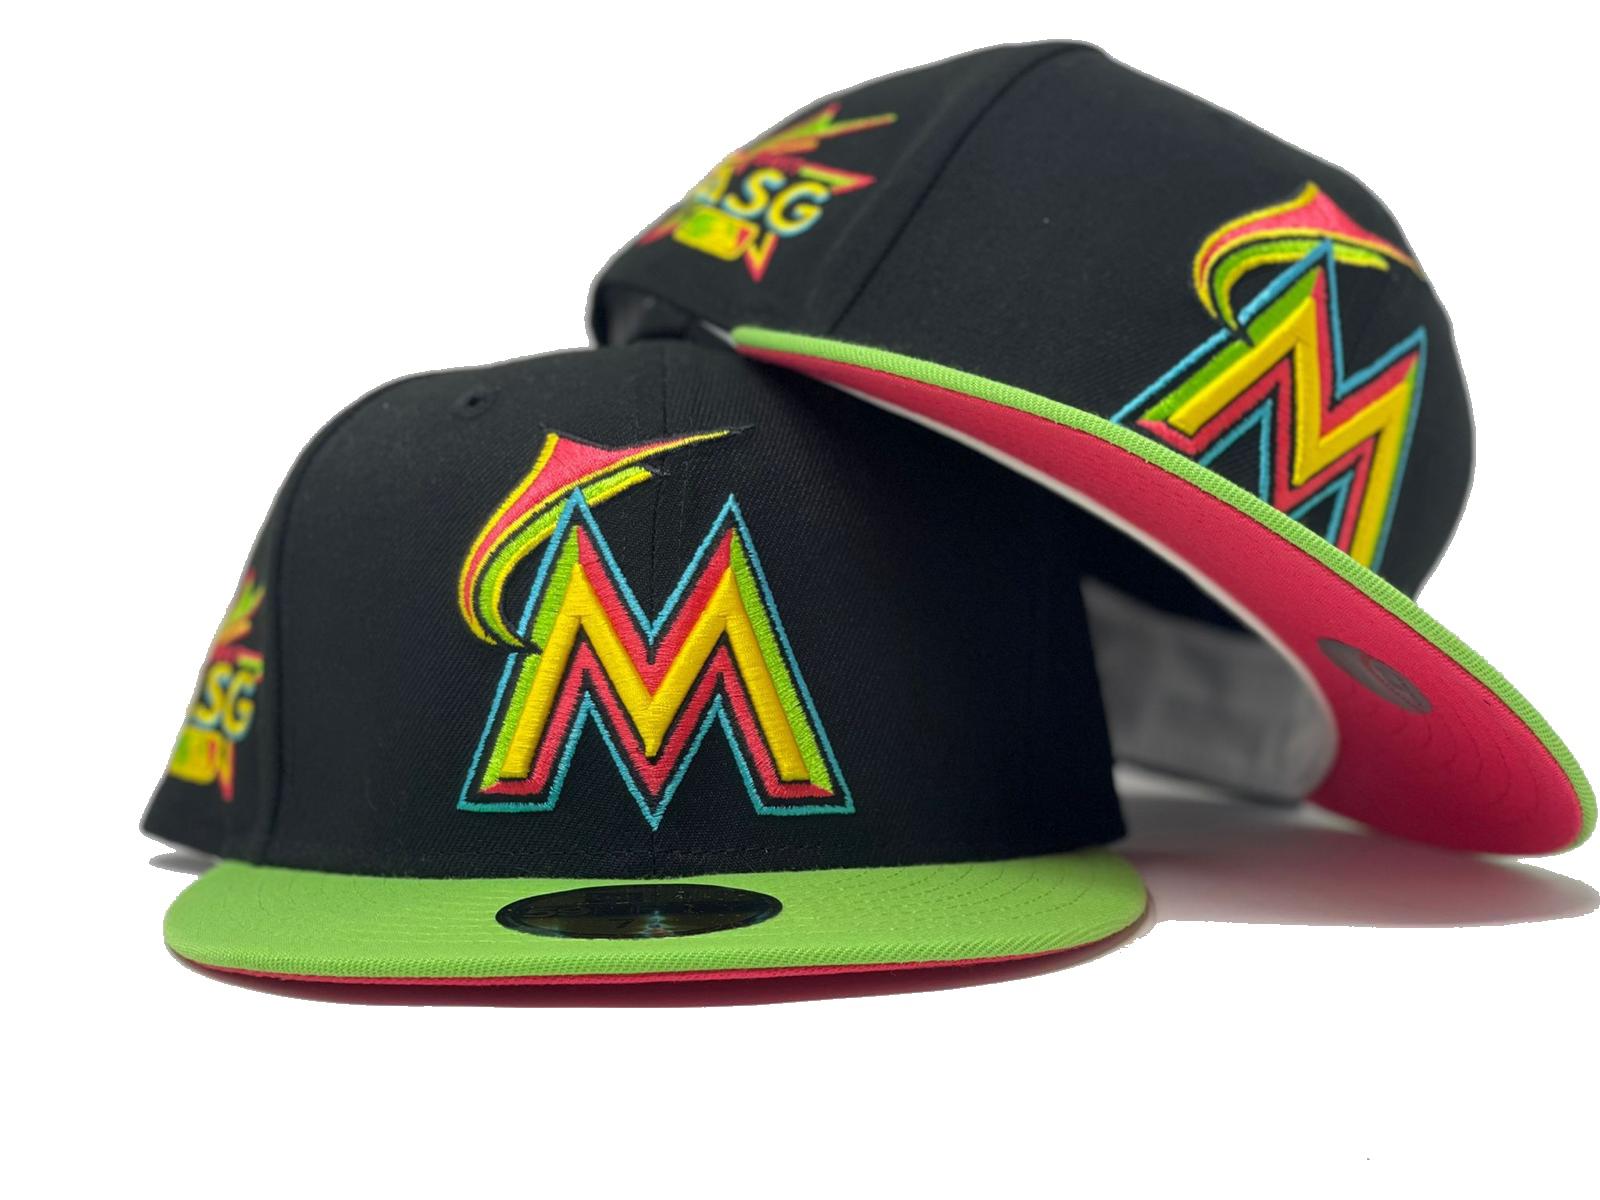 Marlins Charity Auction, Tommy Bahama 2015 MLB All-Star Game Camp